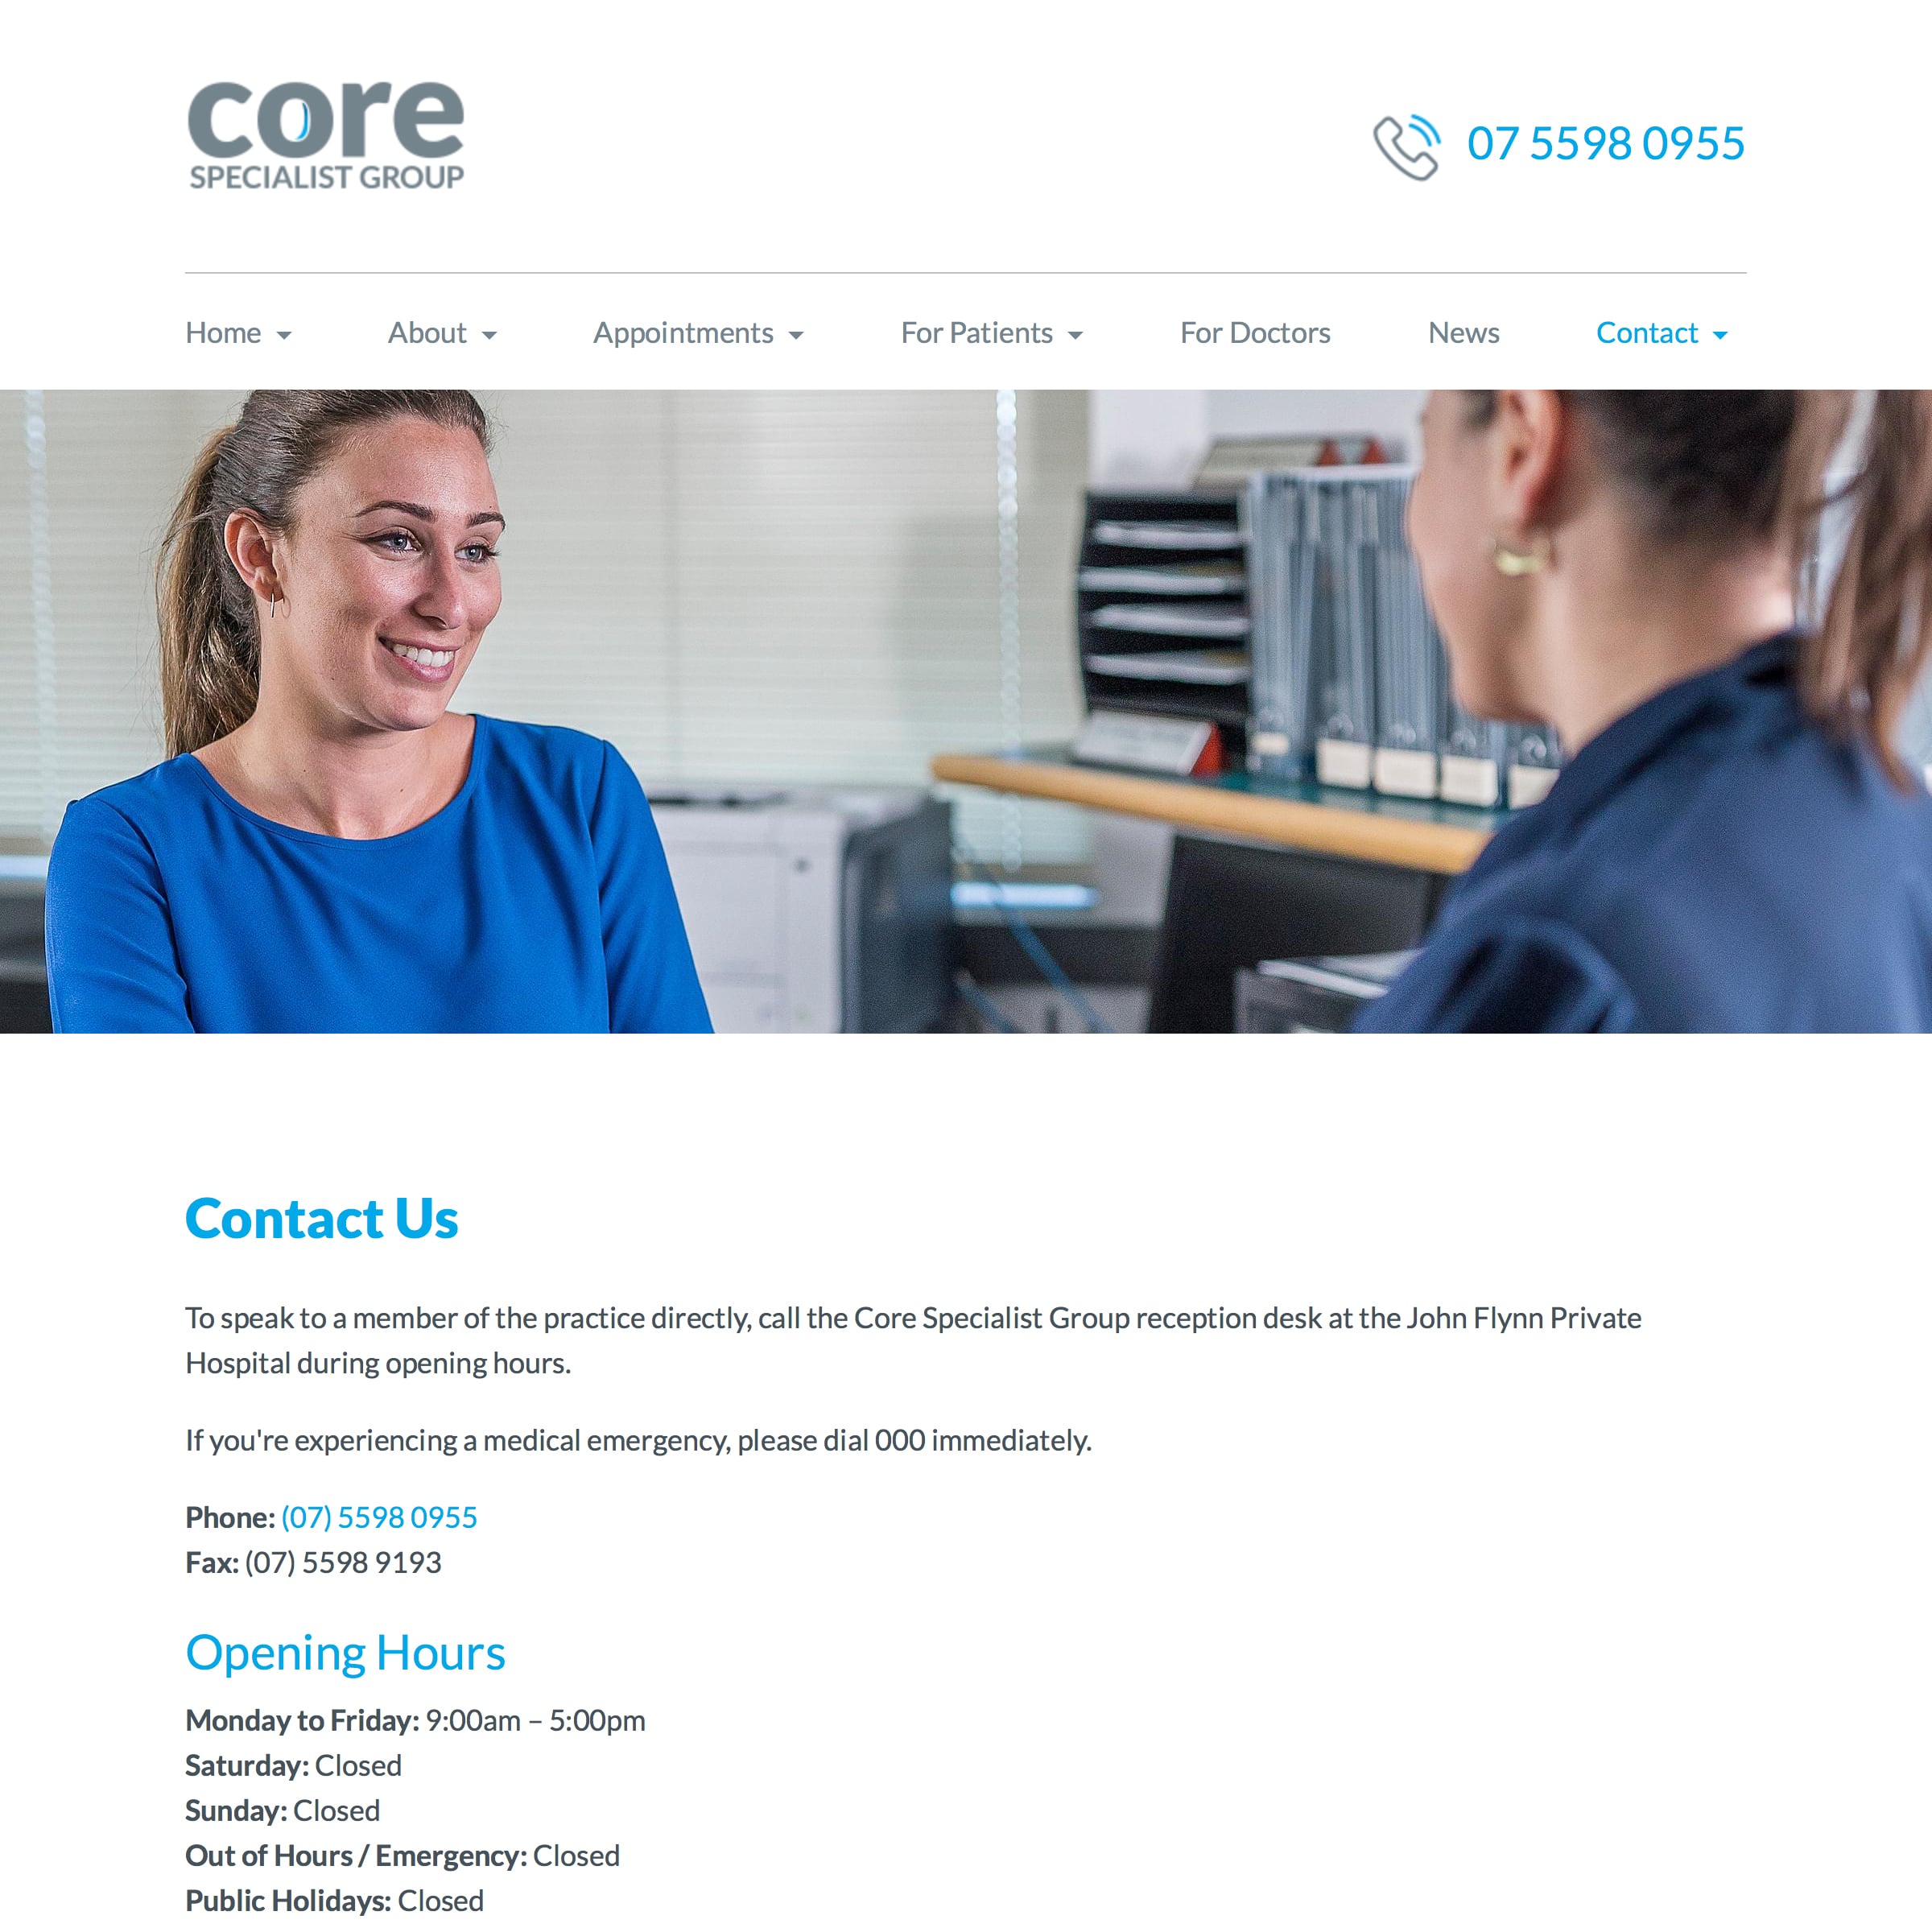 Core Specialist Group - Contact Us